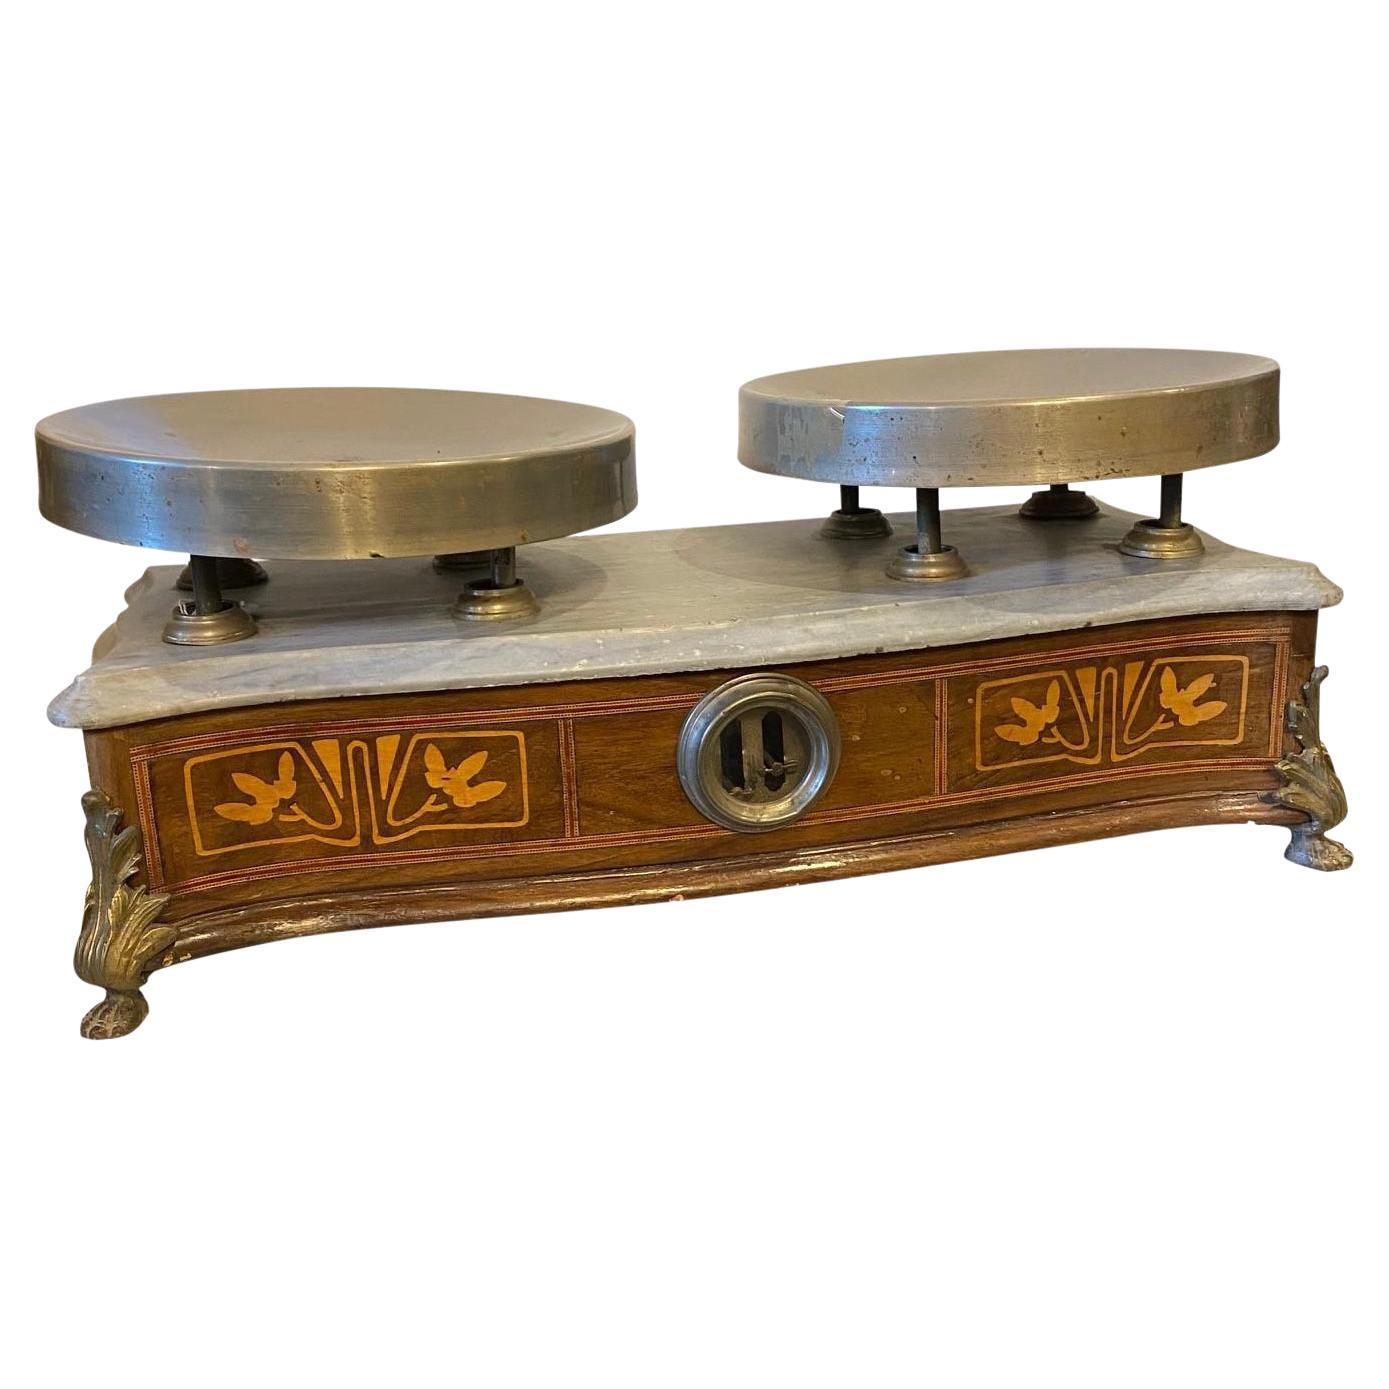 1900s Art Nouveau Italian Scale with Floral Inlays and Bronzes For Sale